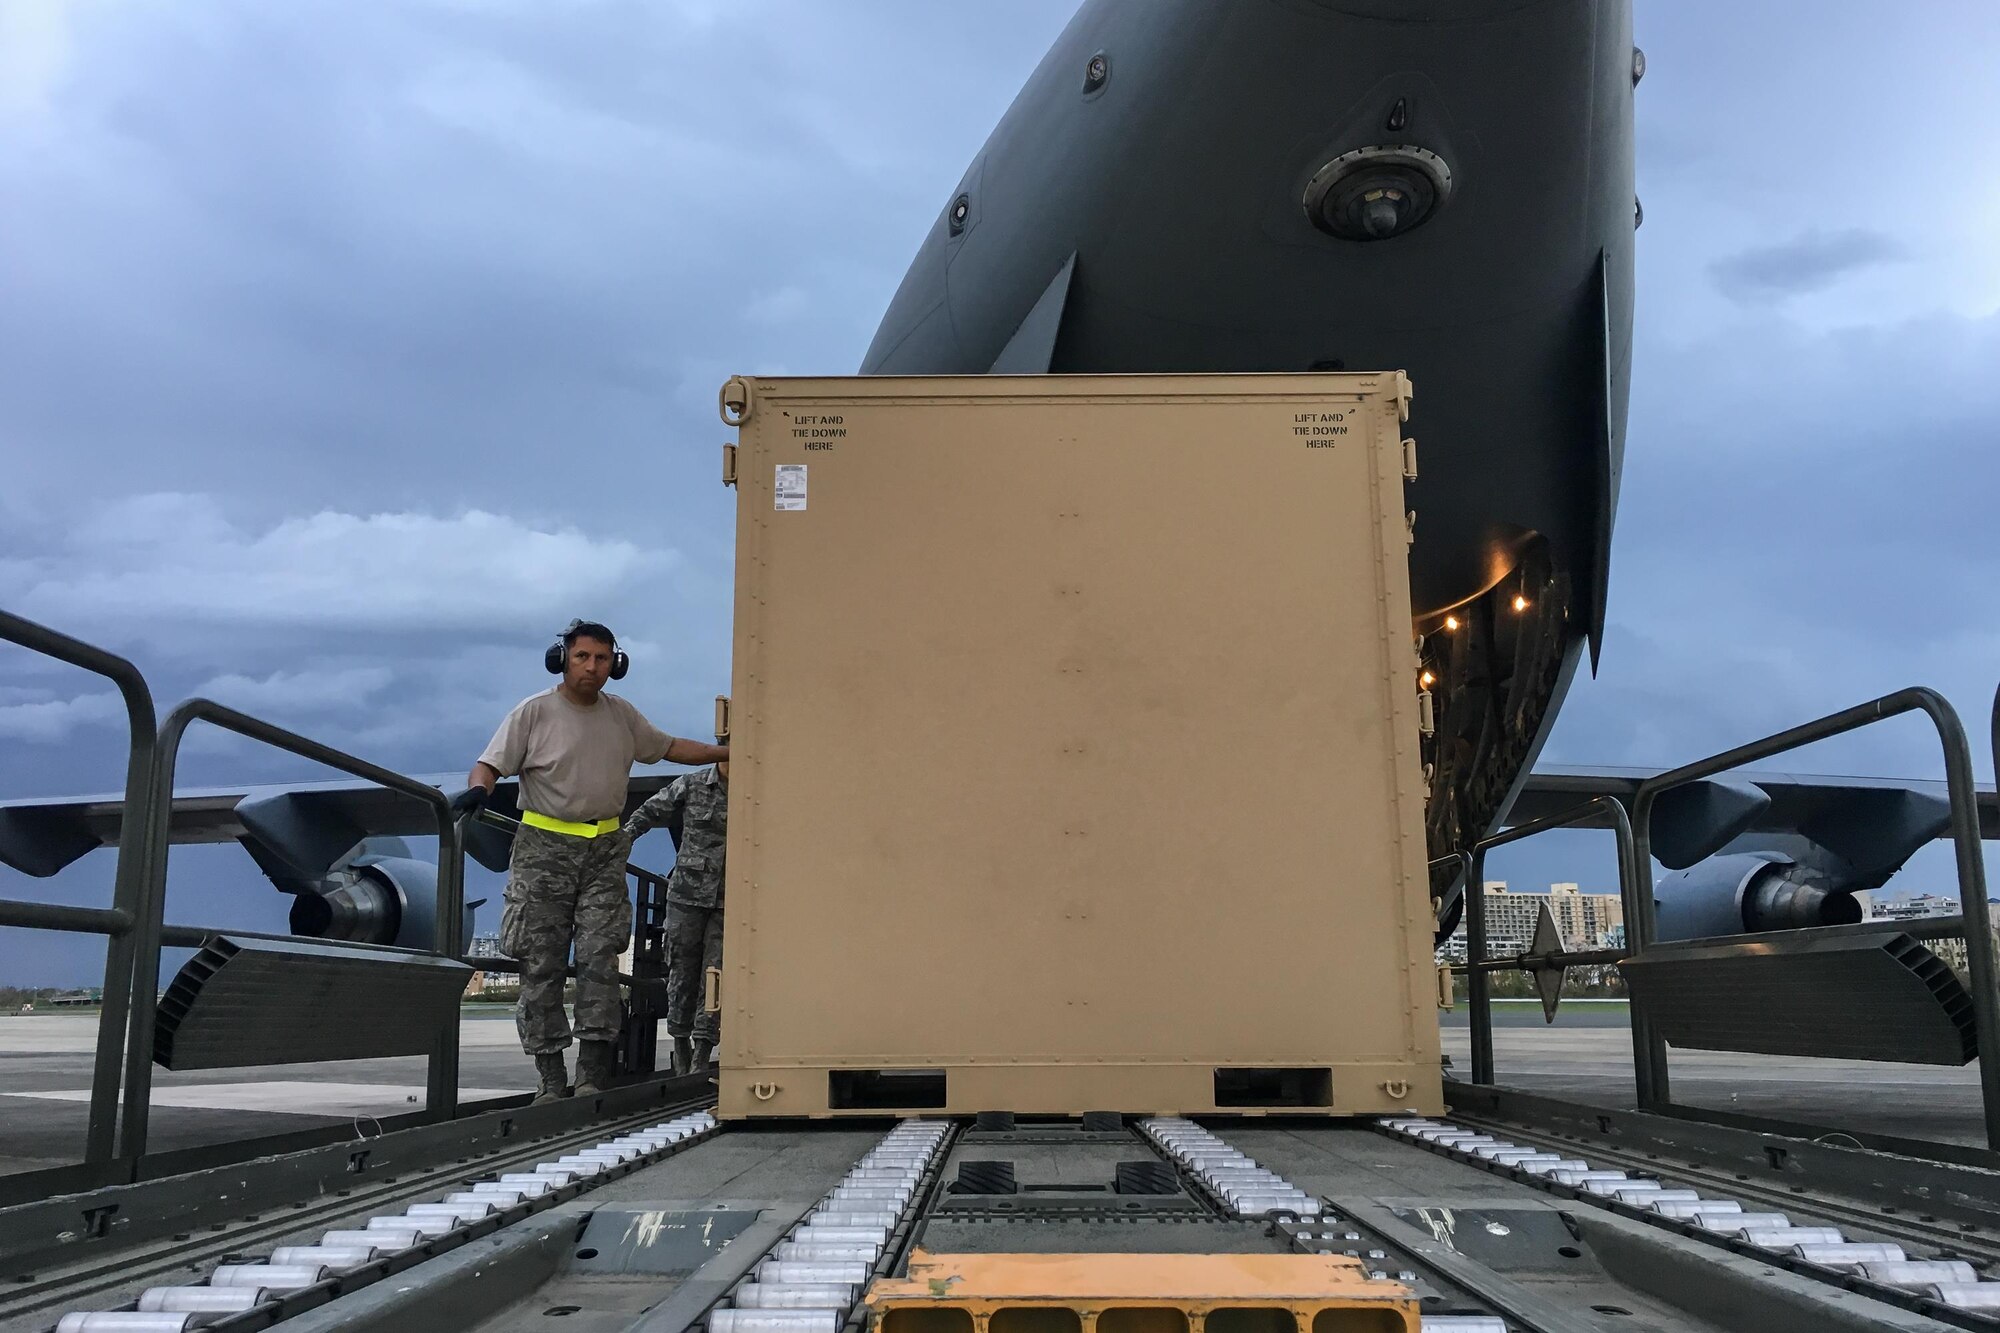 An Airman from the Kentucky Air National Guard’s 123rd Contingency Response Group dowloads relief supplies from a U.S. Air Force C-17 aircraft at Luis Muñoz Marín International Airport in San Juan, Puerto Rico, in the wake of Hurricane Maria Oct. 5, 2017. The unit’s Airmen established an aerial port of debarkation upon arrival here Sept. 23, and have processed more than 7.2 million pounds of cargo and humanitarian aid for distribution in the first three weeks of the operation. (U.S. Air National Guard photo by Lt. Col. Dale Greer)